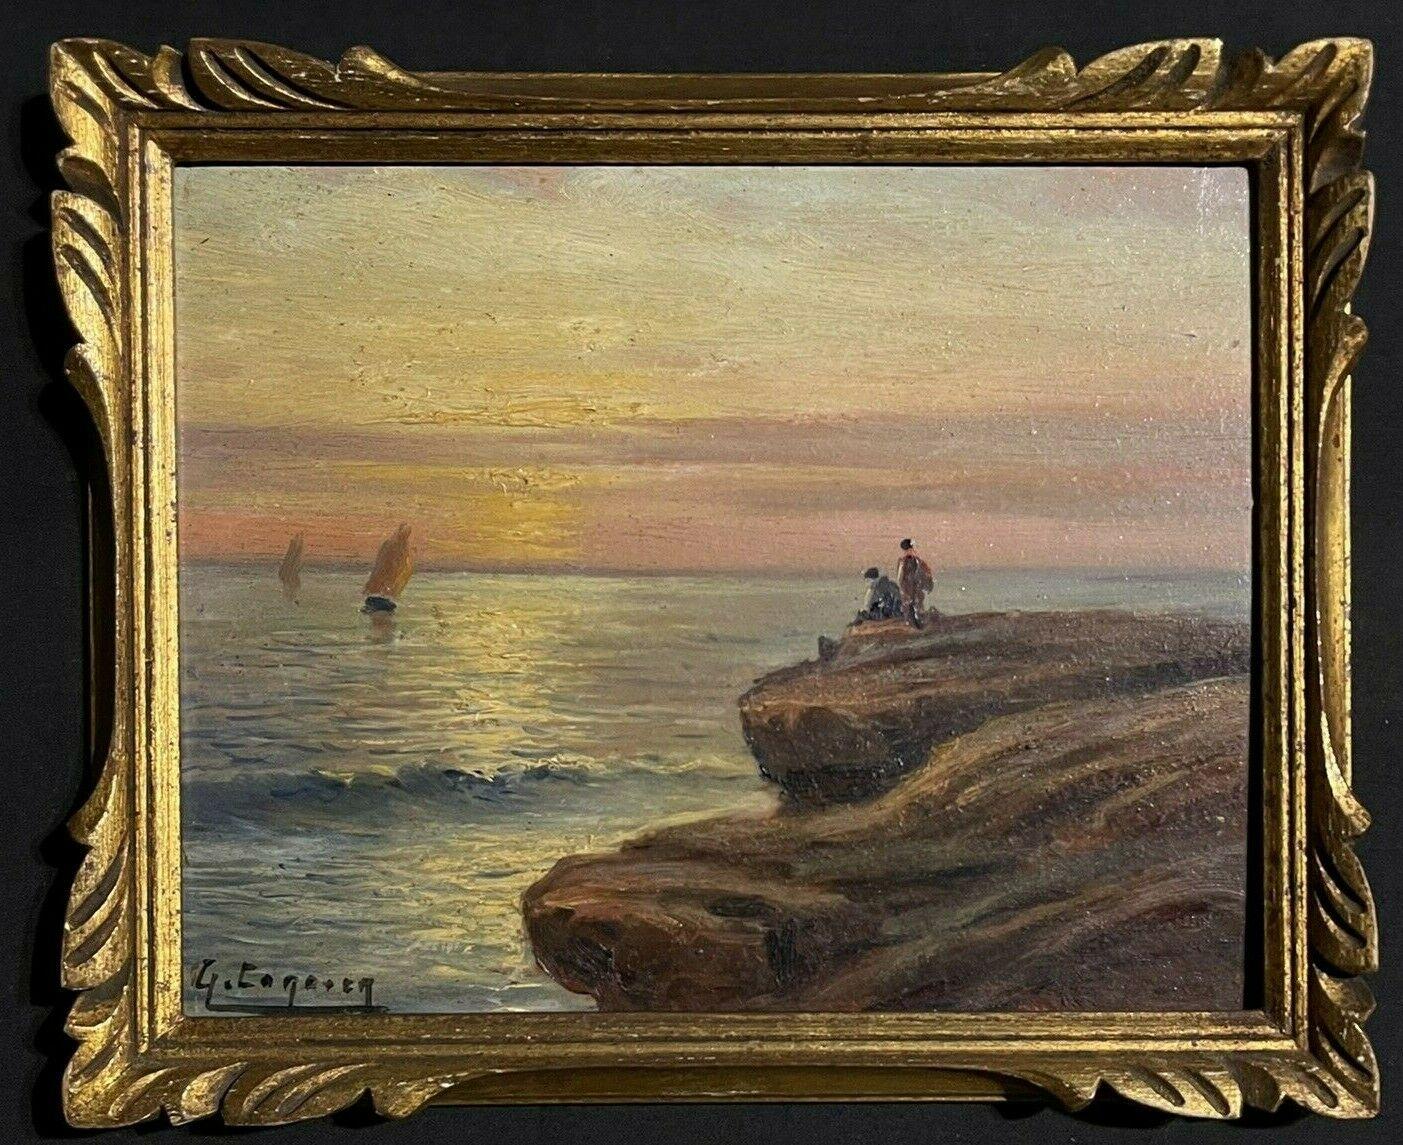 Antique French Oil Figures on Coastal Rocks Looking at Sunset over Sea - Painting by Unknown